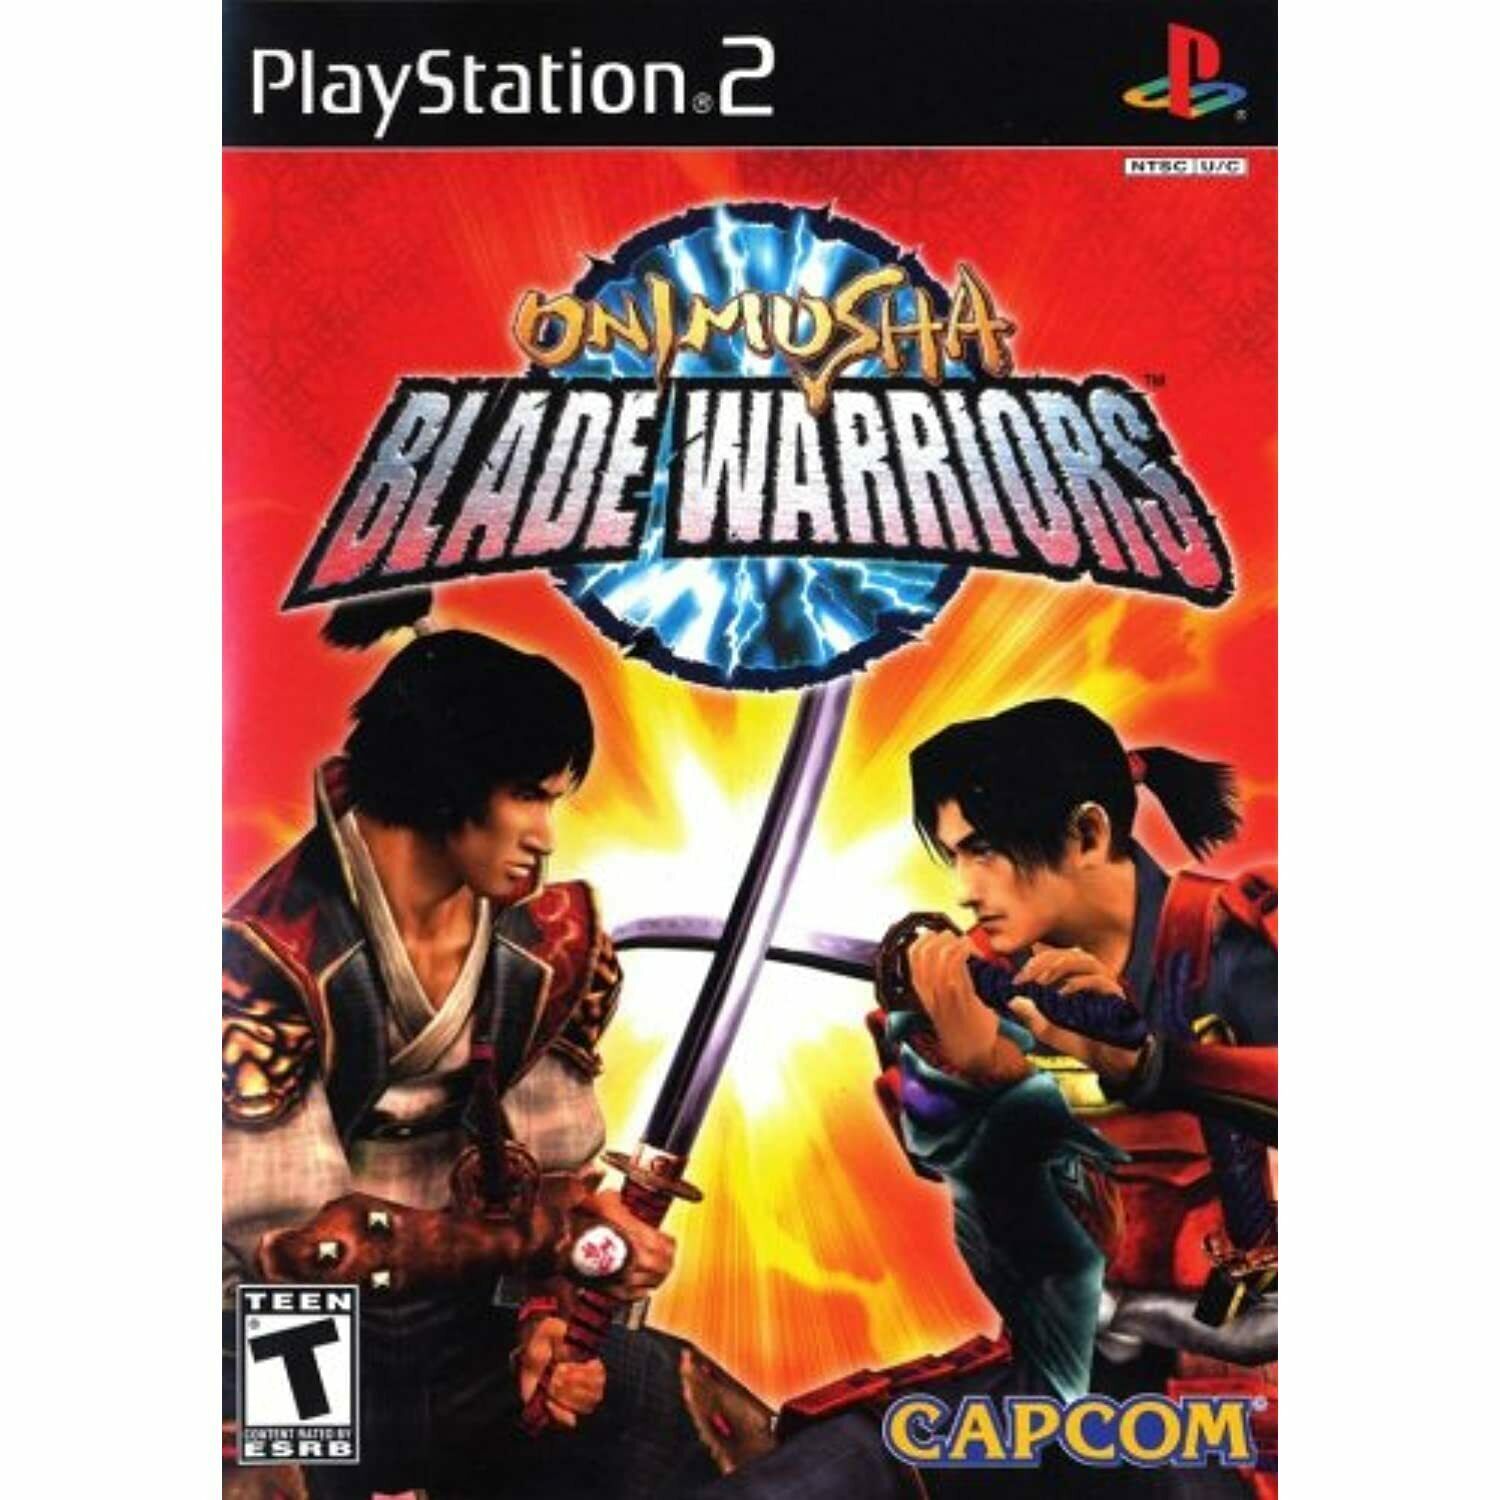 Onimusha: Blade Warriors - disk, case and cover art, but no manual - $31.52